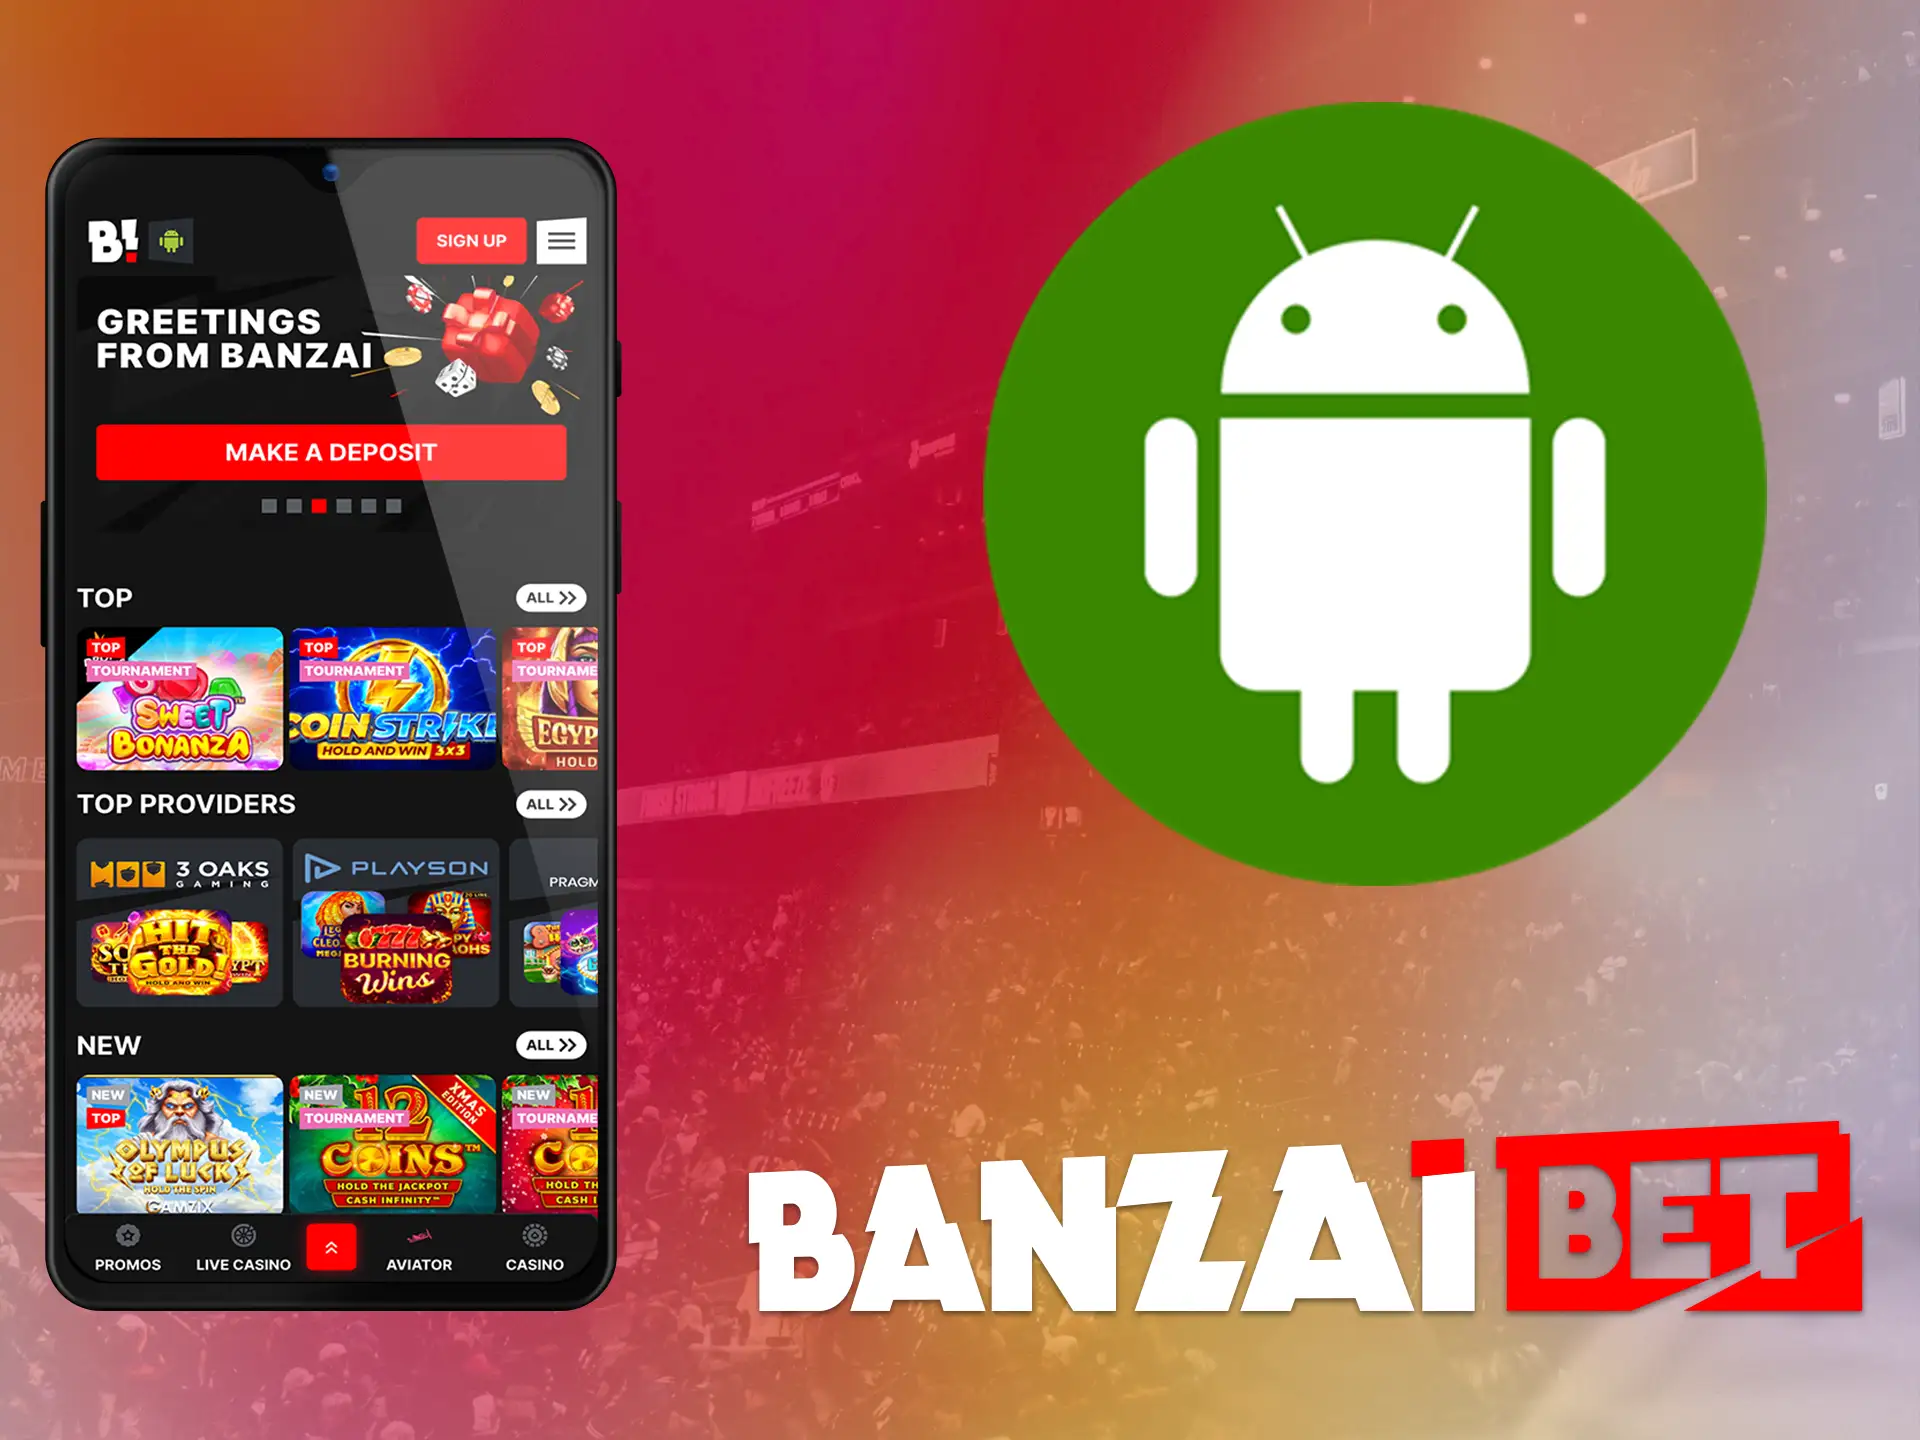 For ease of play, try a special application Banzai App for this operating system, it has a similar interface to the site.